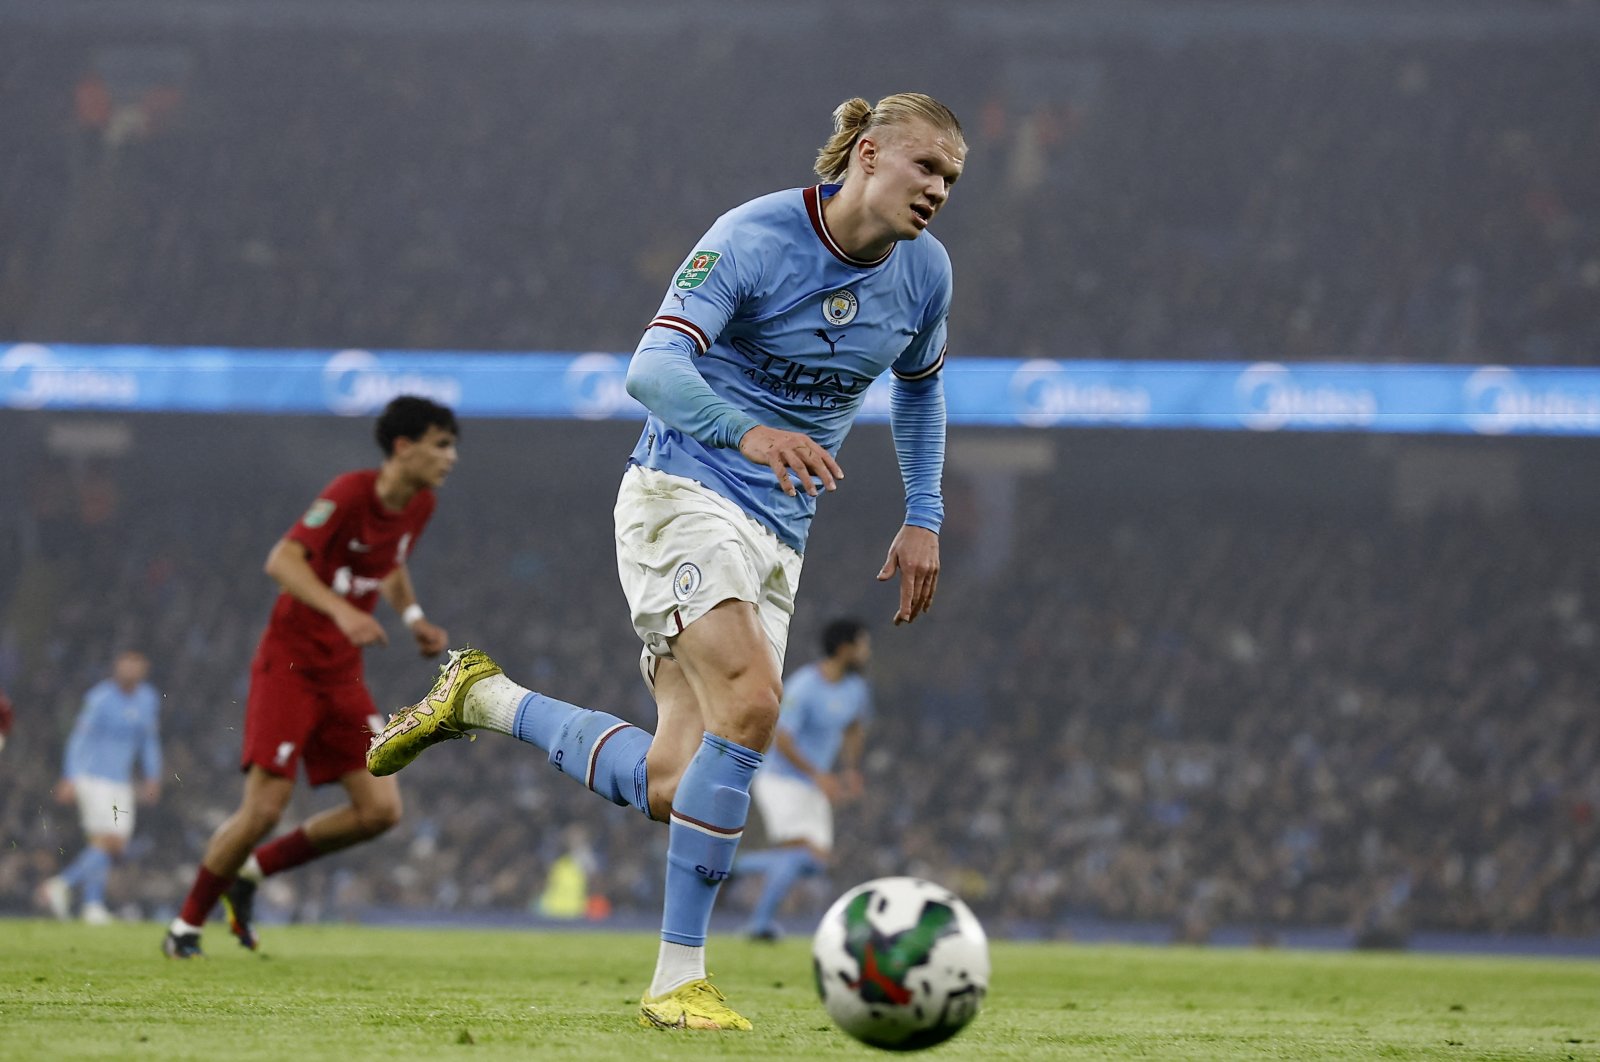 Manchester City&#039;s Erling Braut Haaland in action during the Manchester City versus Liverpool Carabao Cup round of 16 match at the Etihad Stadium, Manchester, United Kingdom, Dec. 22, 2022. (Reuters Photo)